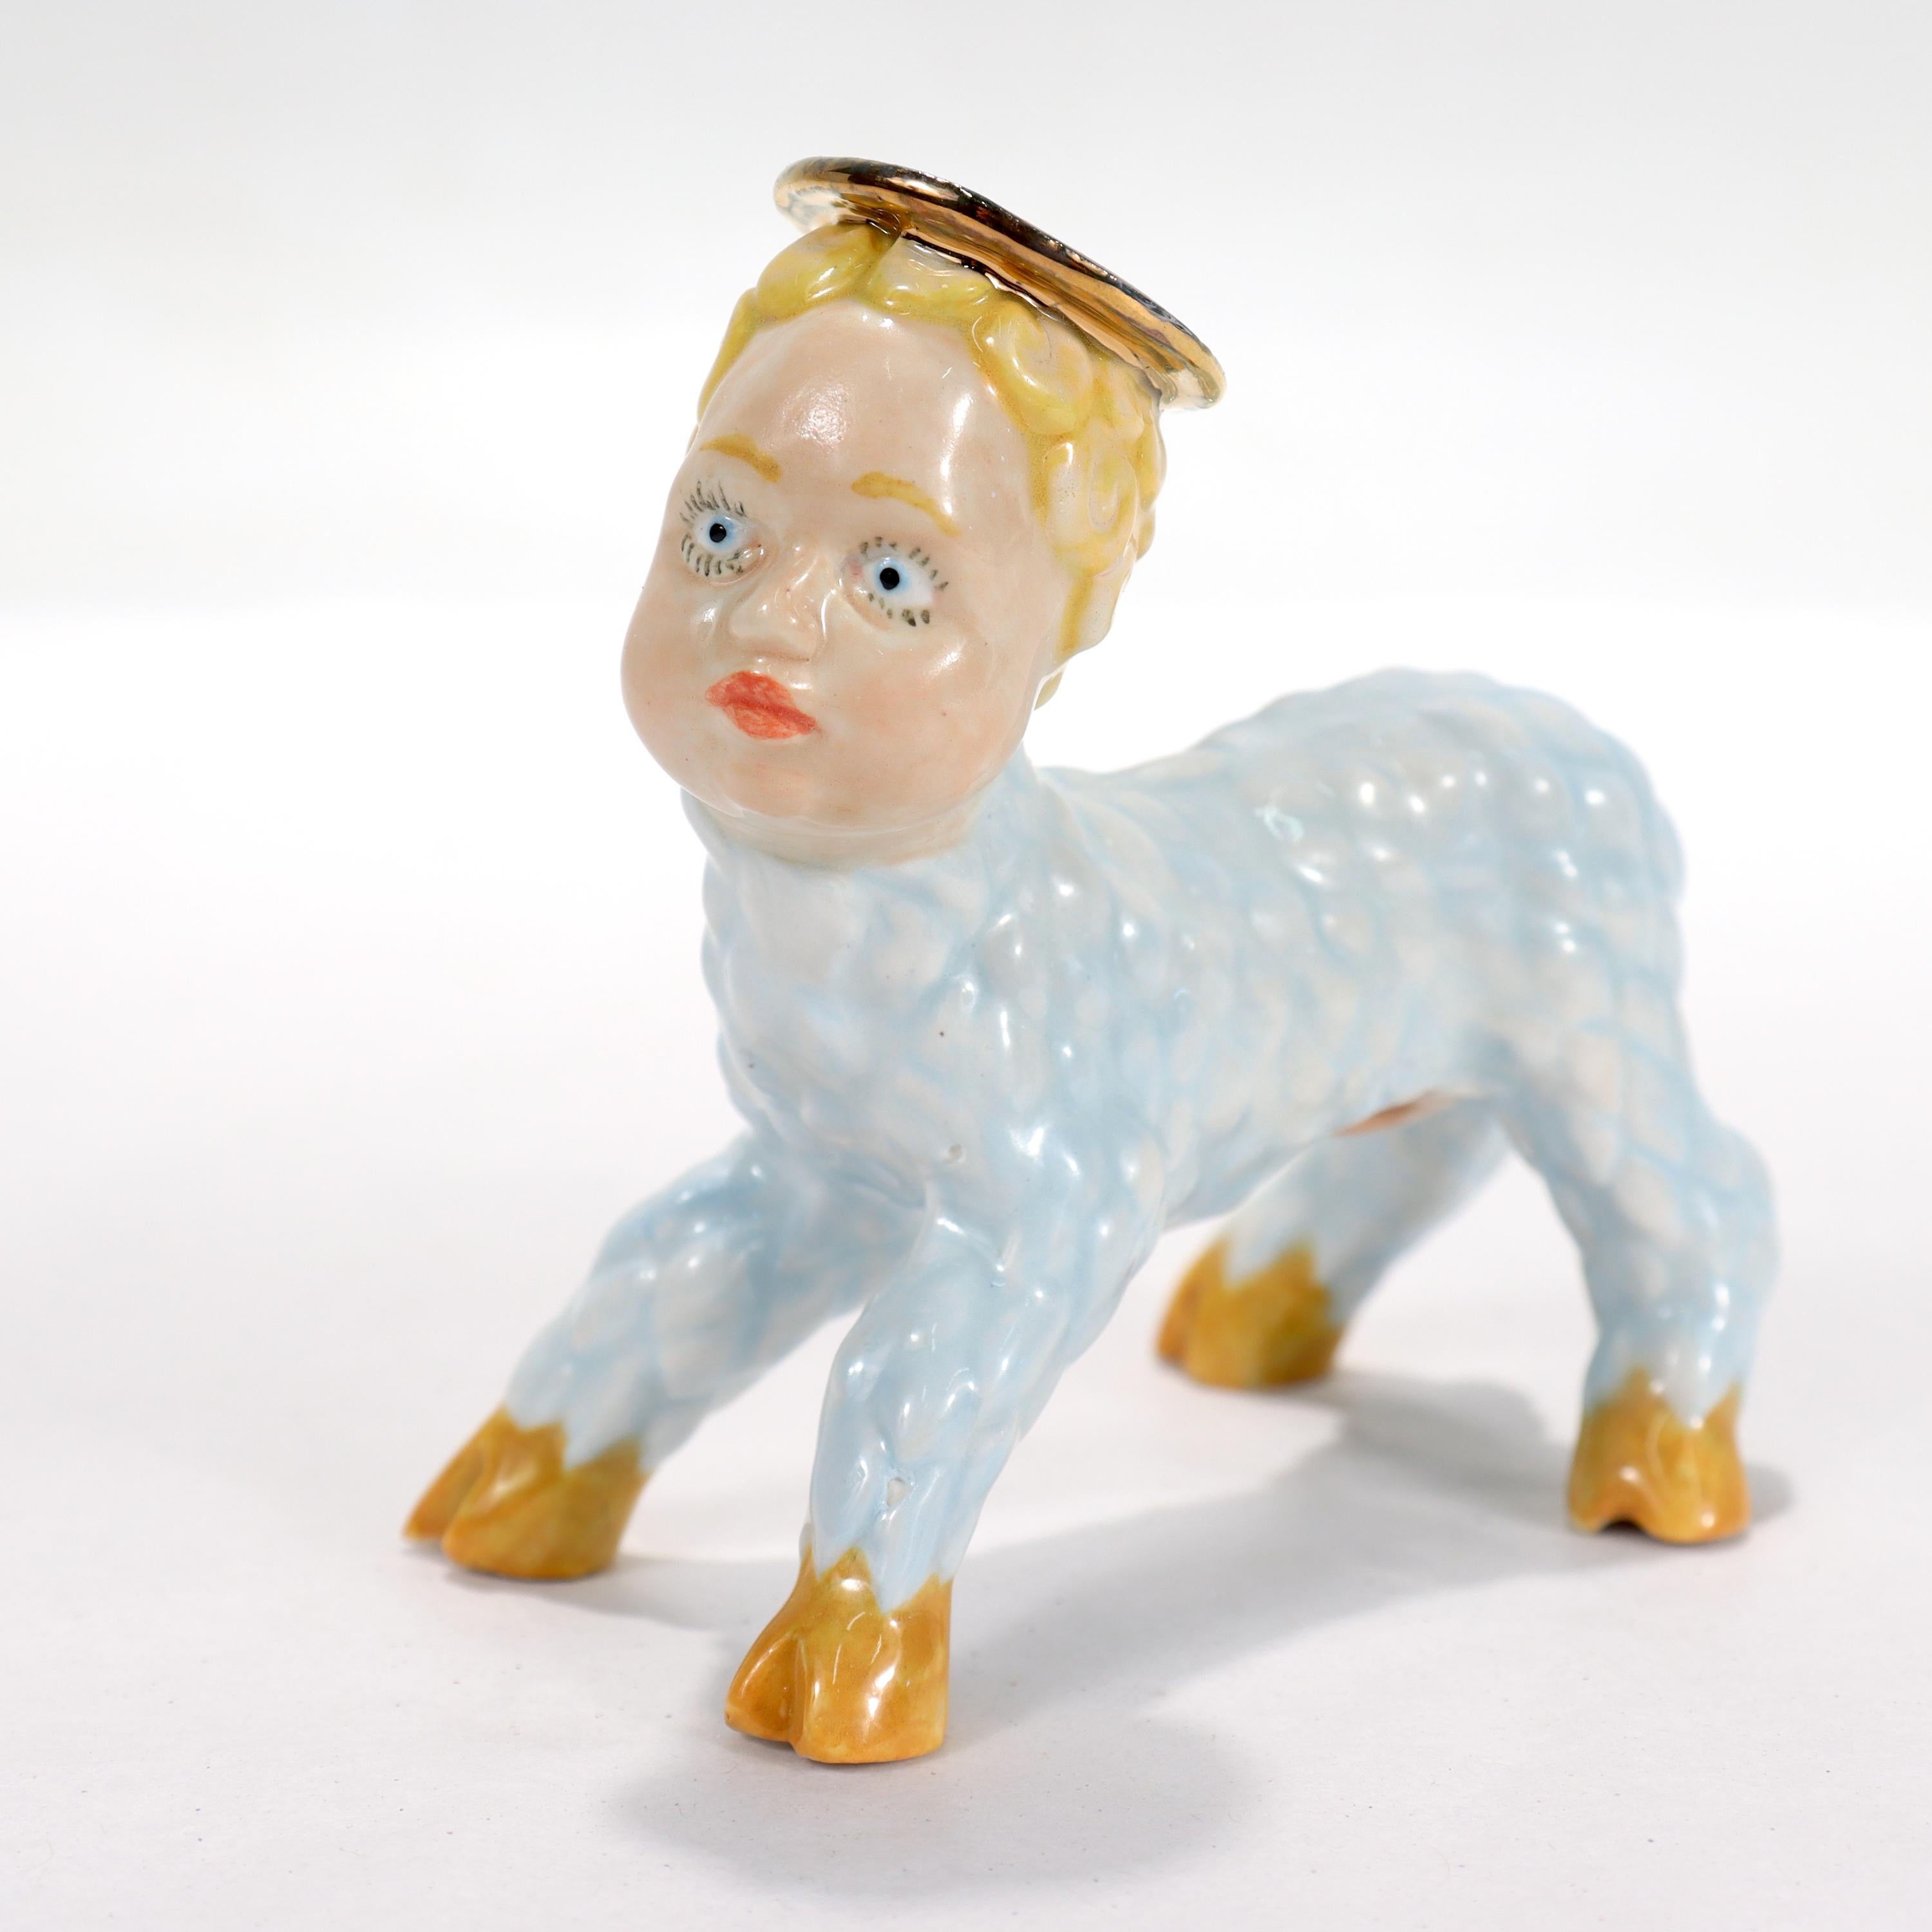 A fine porcelain figurine.

From the 'Mary Had a Little Lamb' series.

In the form of a lamb with a human head and halo.

By Russel Biles. 

A self-described “son of the South,” Russell Biles was born, raised, and still lives in the southern